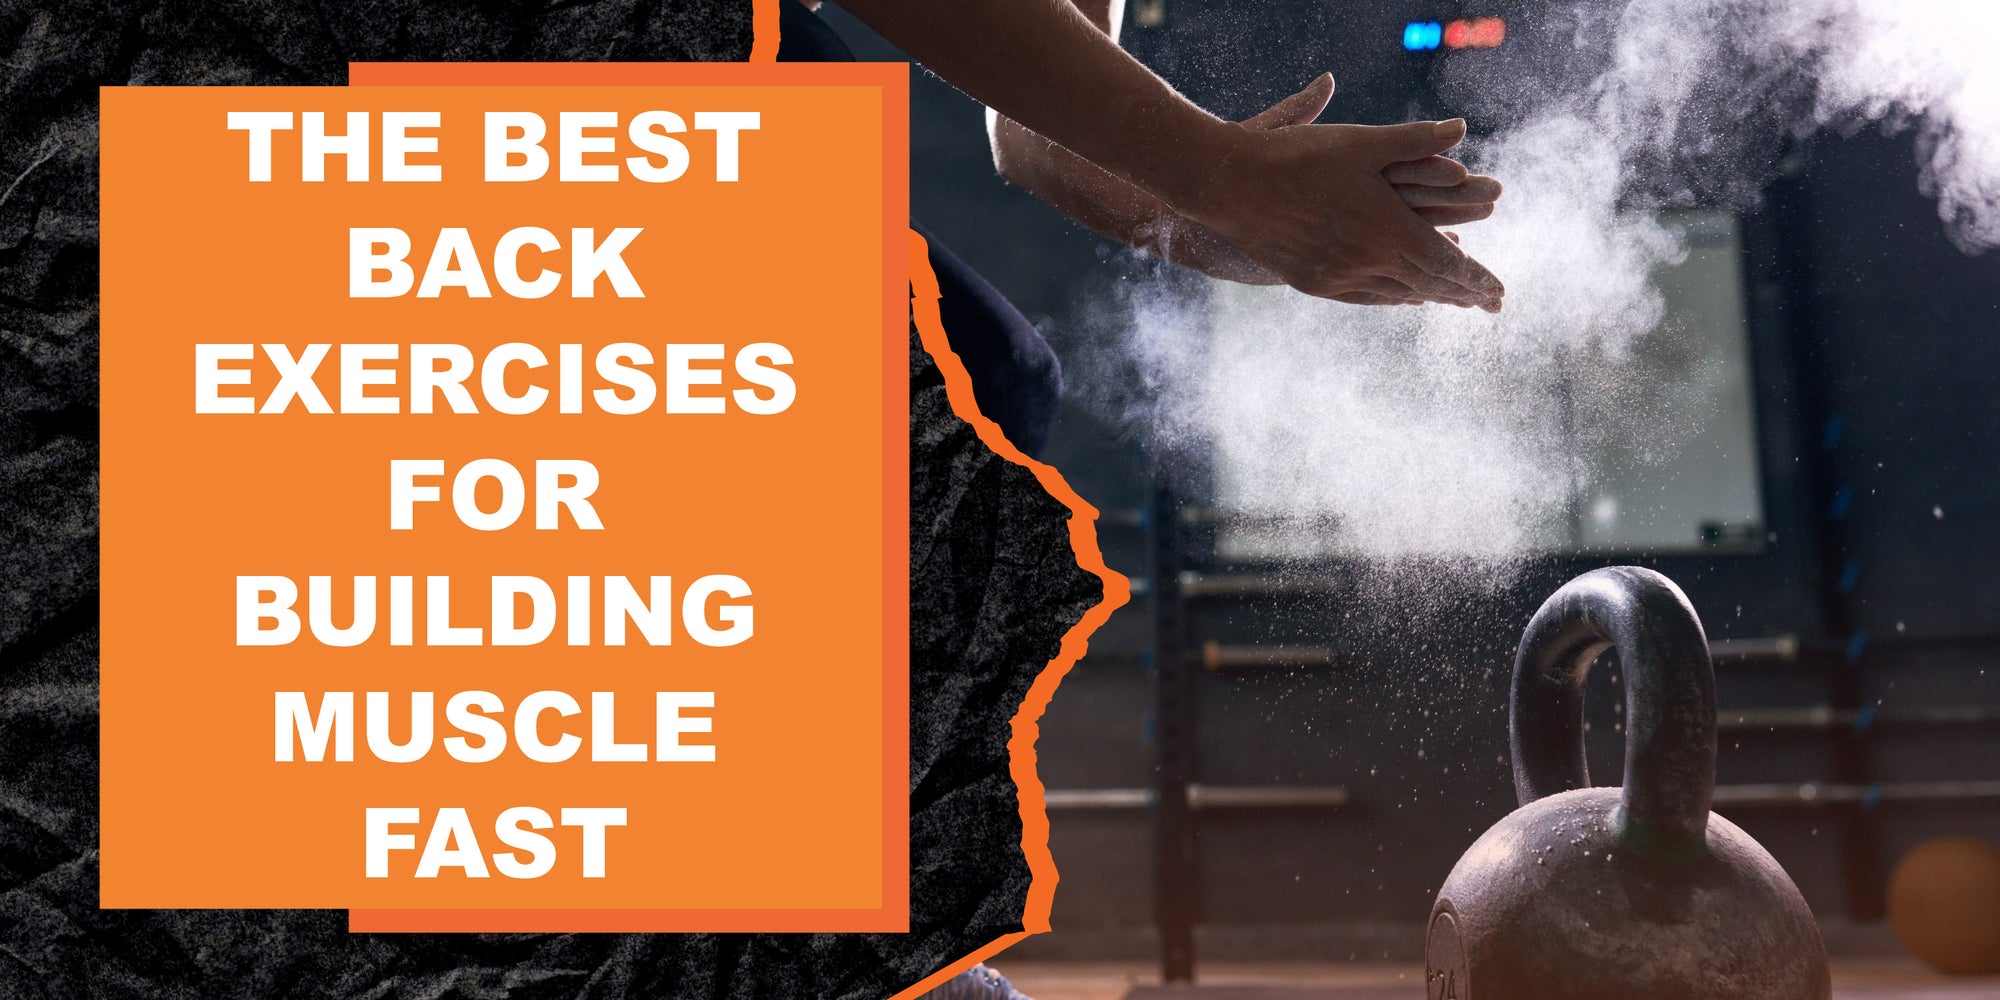 The Best Back Exercises for Building Muscle Fast